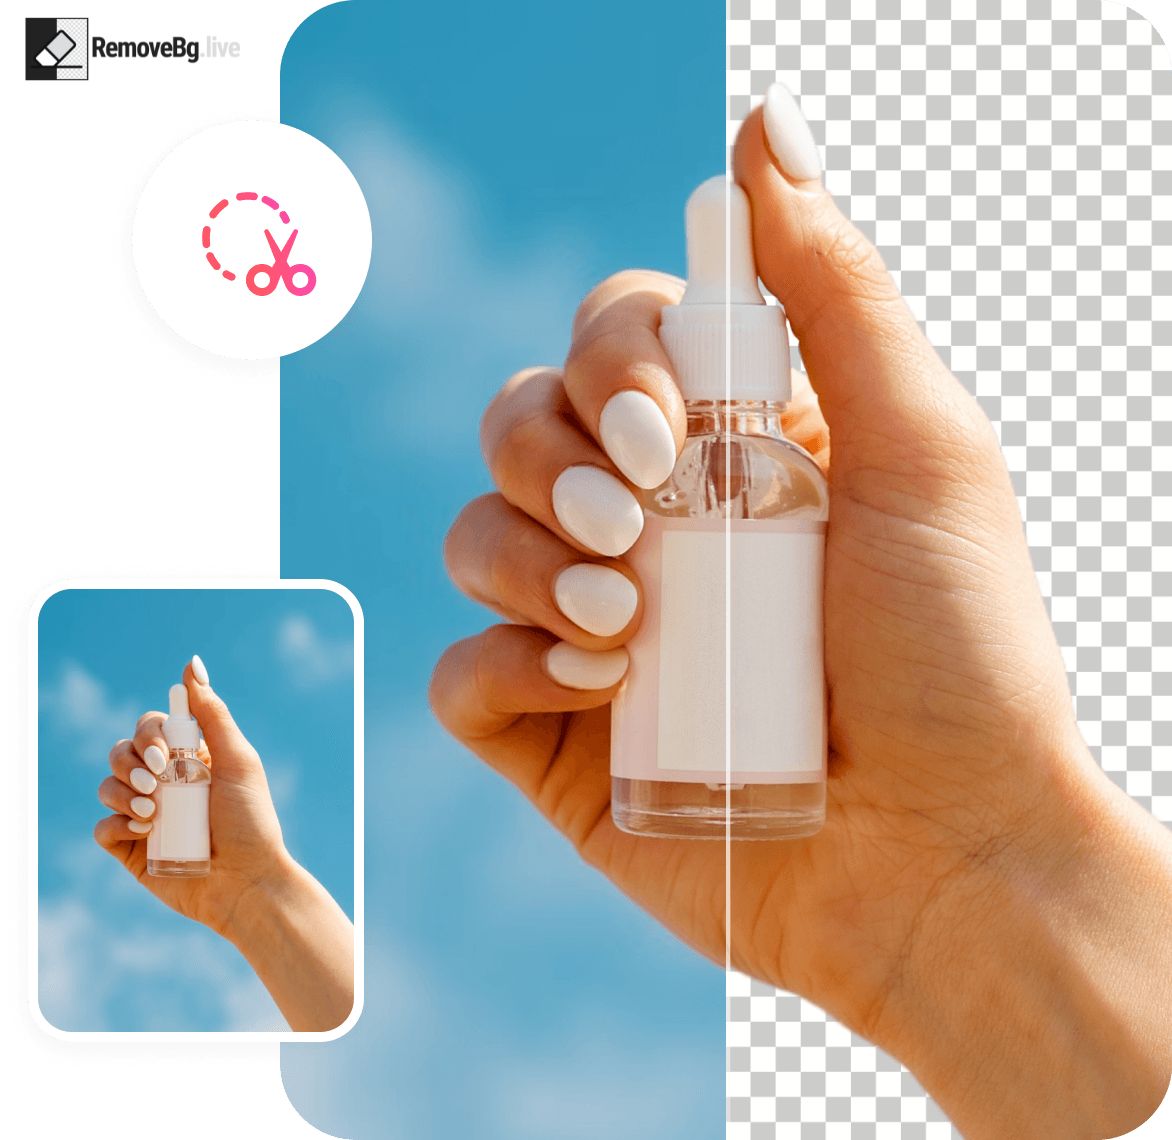  Transform Your Product Images with RemoveBG.live